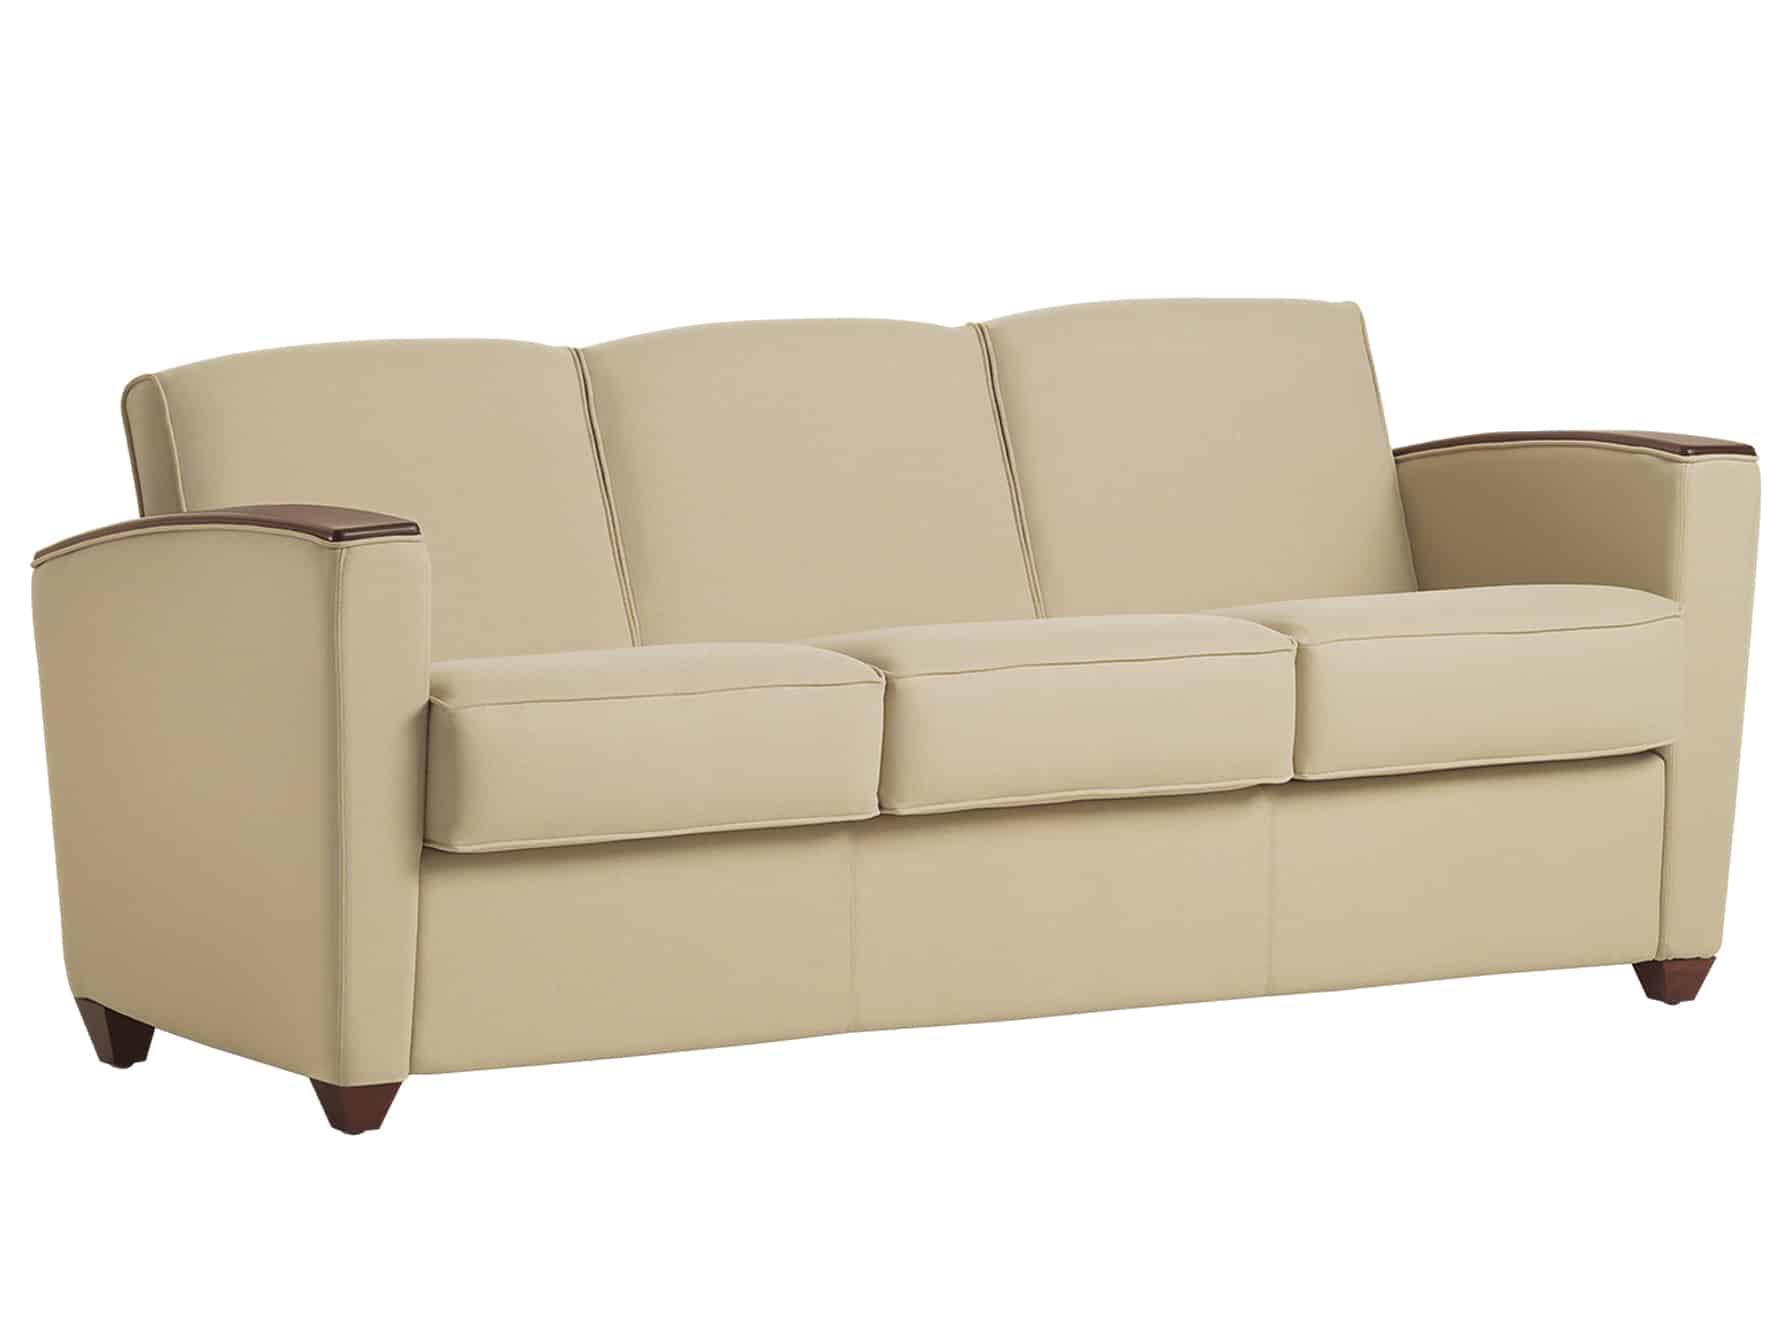 Reflect Sofa, with Wood Arm Cap and Wood Feet (three quarter view)